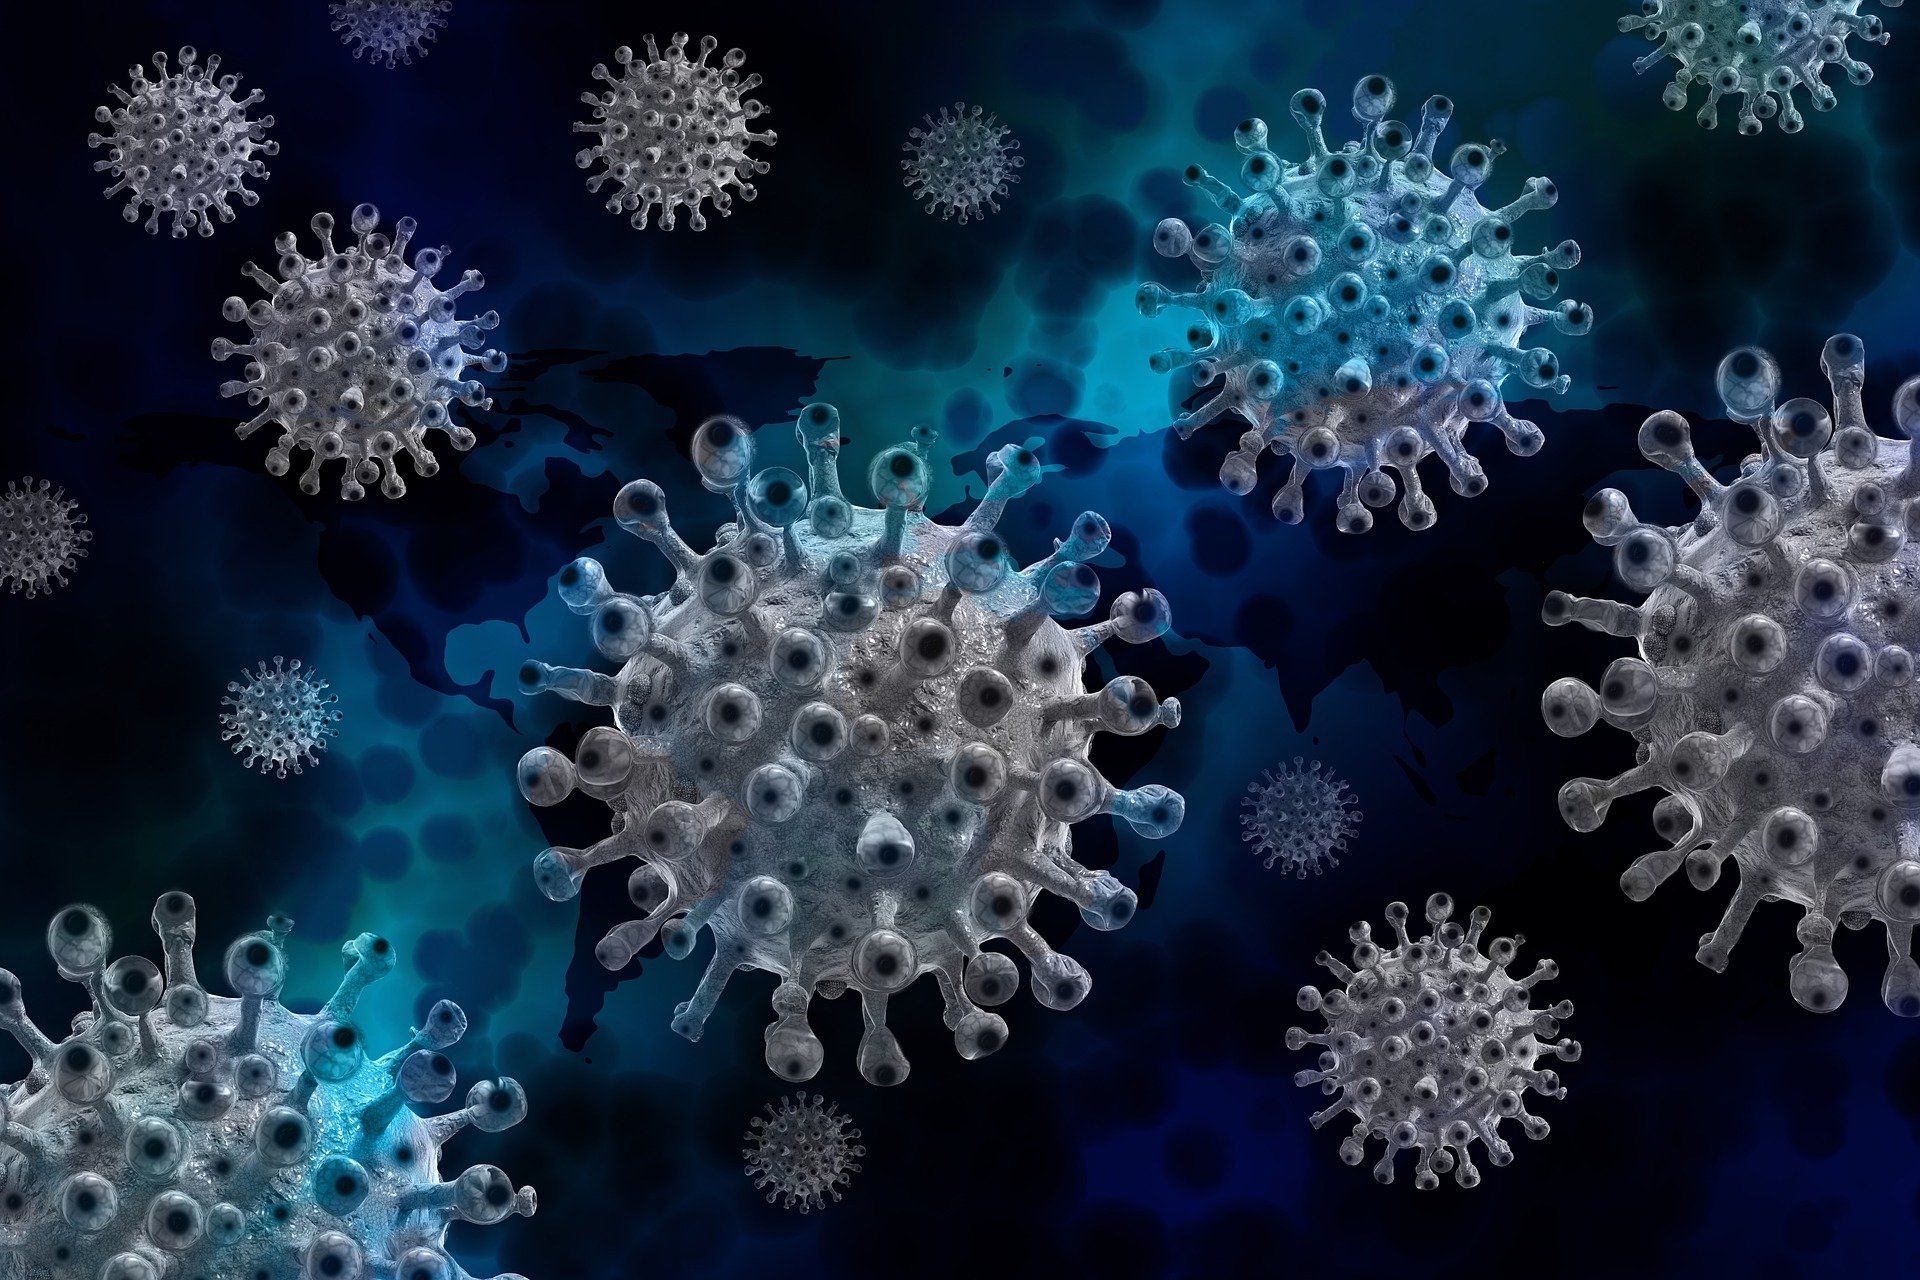 US scientists develop a potential vaccine for all variants of coronavirus